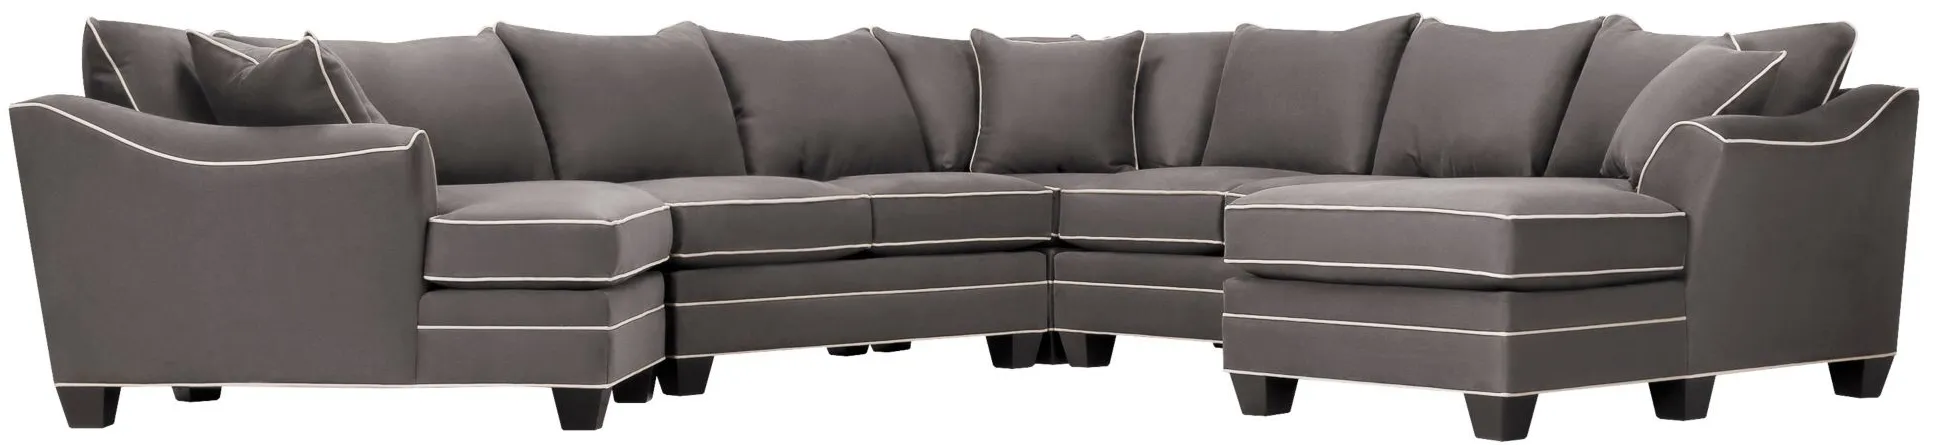 Foresthill 5-pc. Right Hand Facing Sectional Sofa in Suede So Soft Slate by H.M. Richards